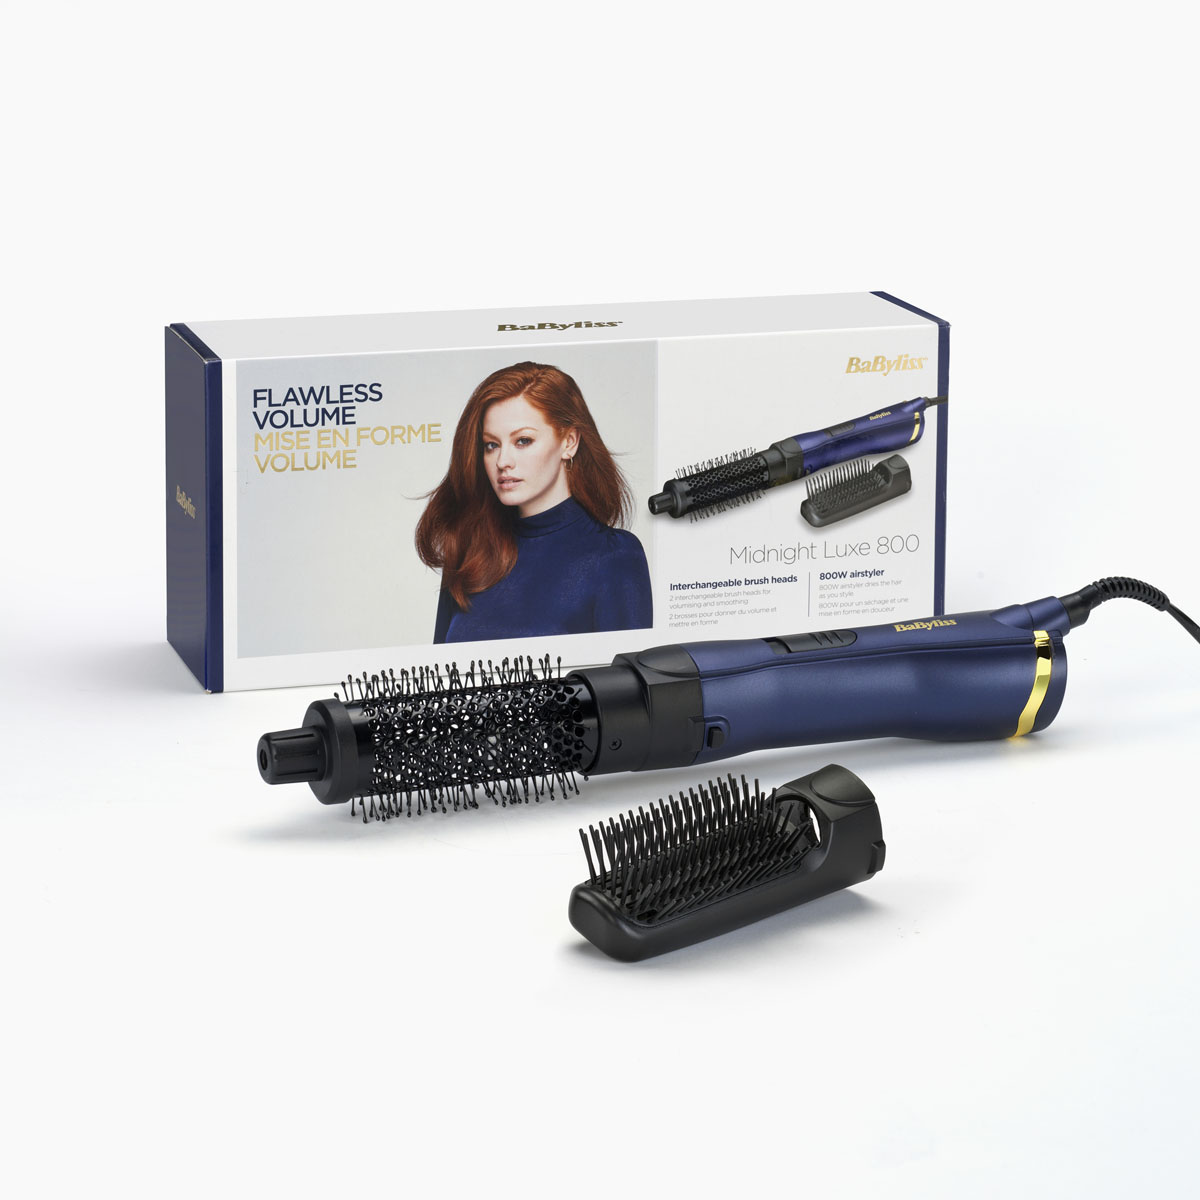 Finland | Luxe 800 Midnight BaByliss